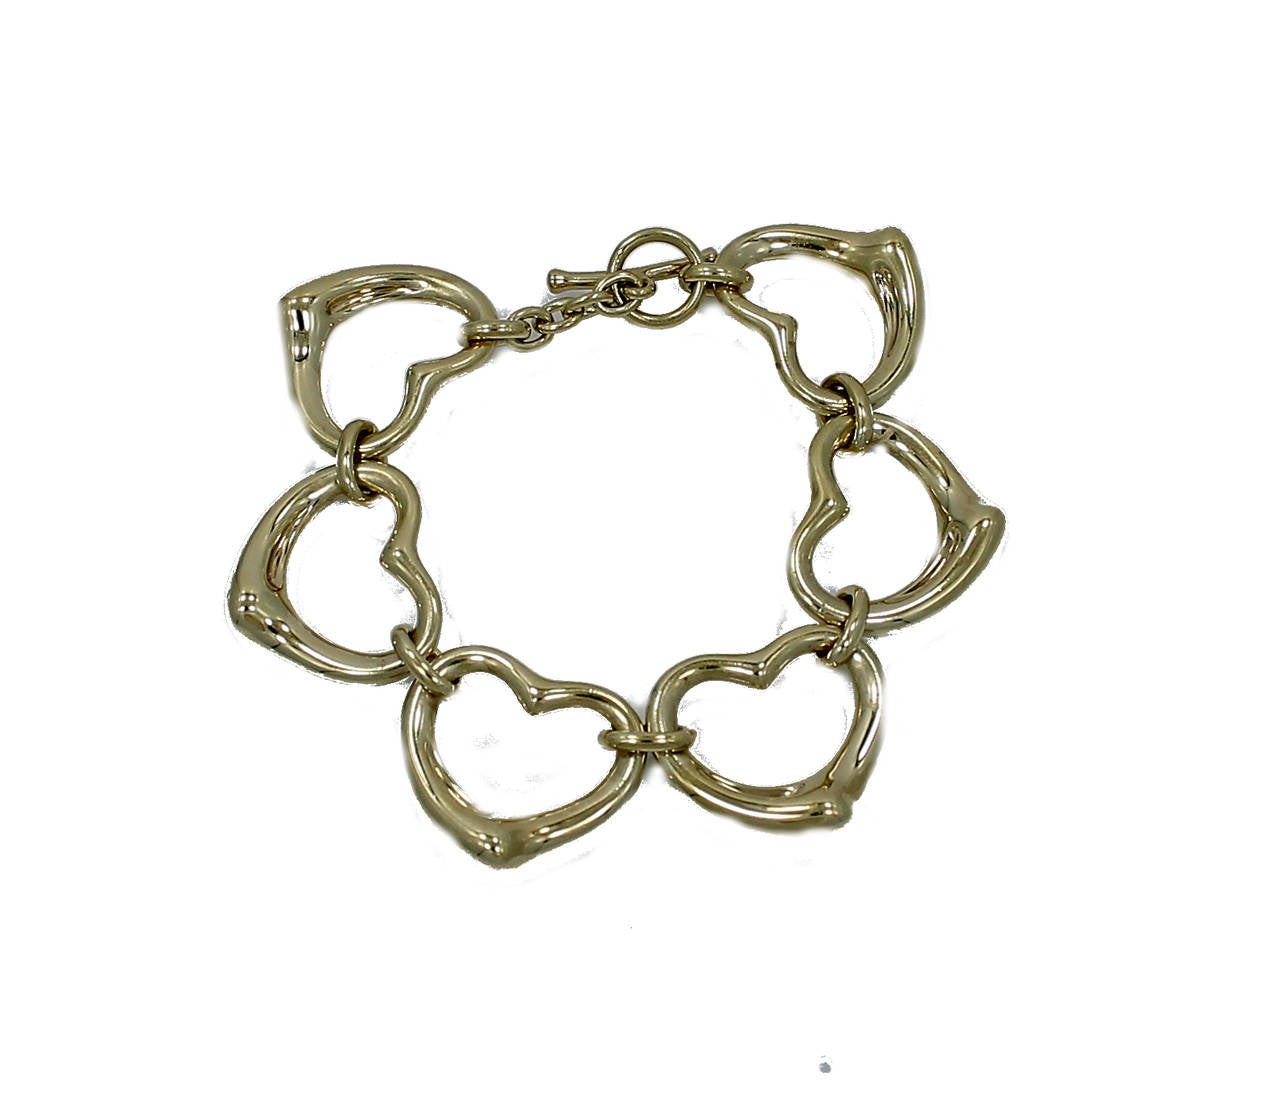 This is a beautiful Elsa Peretti designed for Tiffany & Co. Heart bracelet in yellow gold. The bracelet is 7